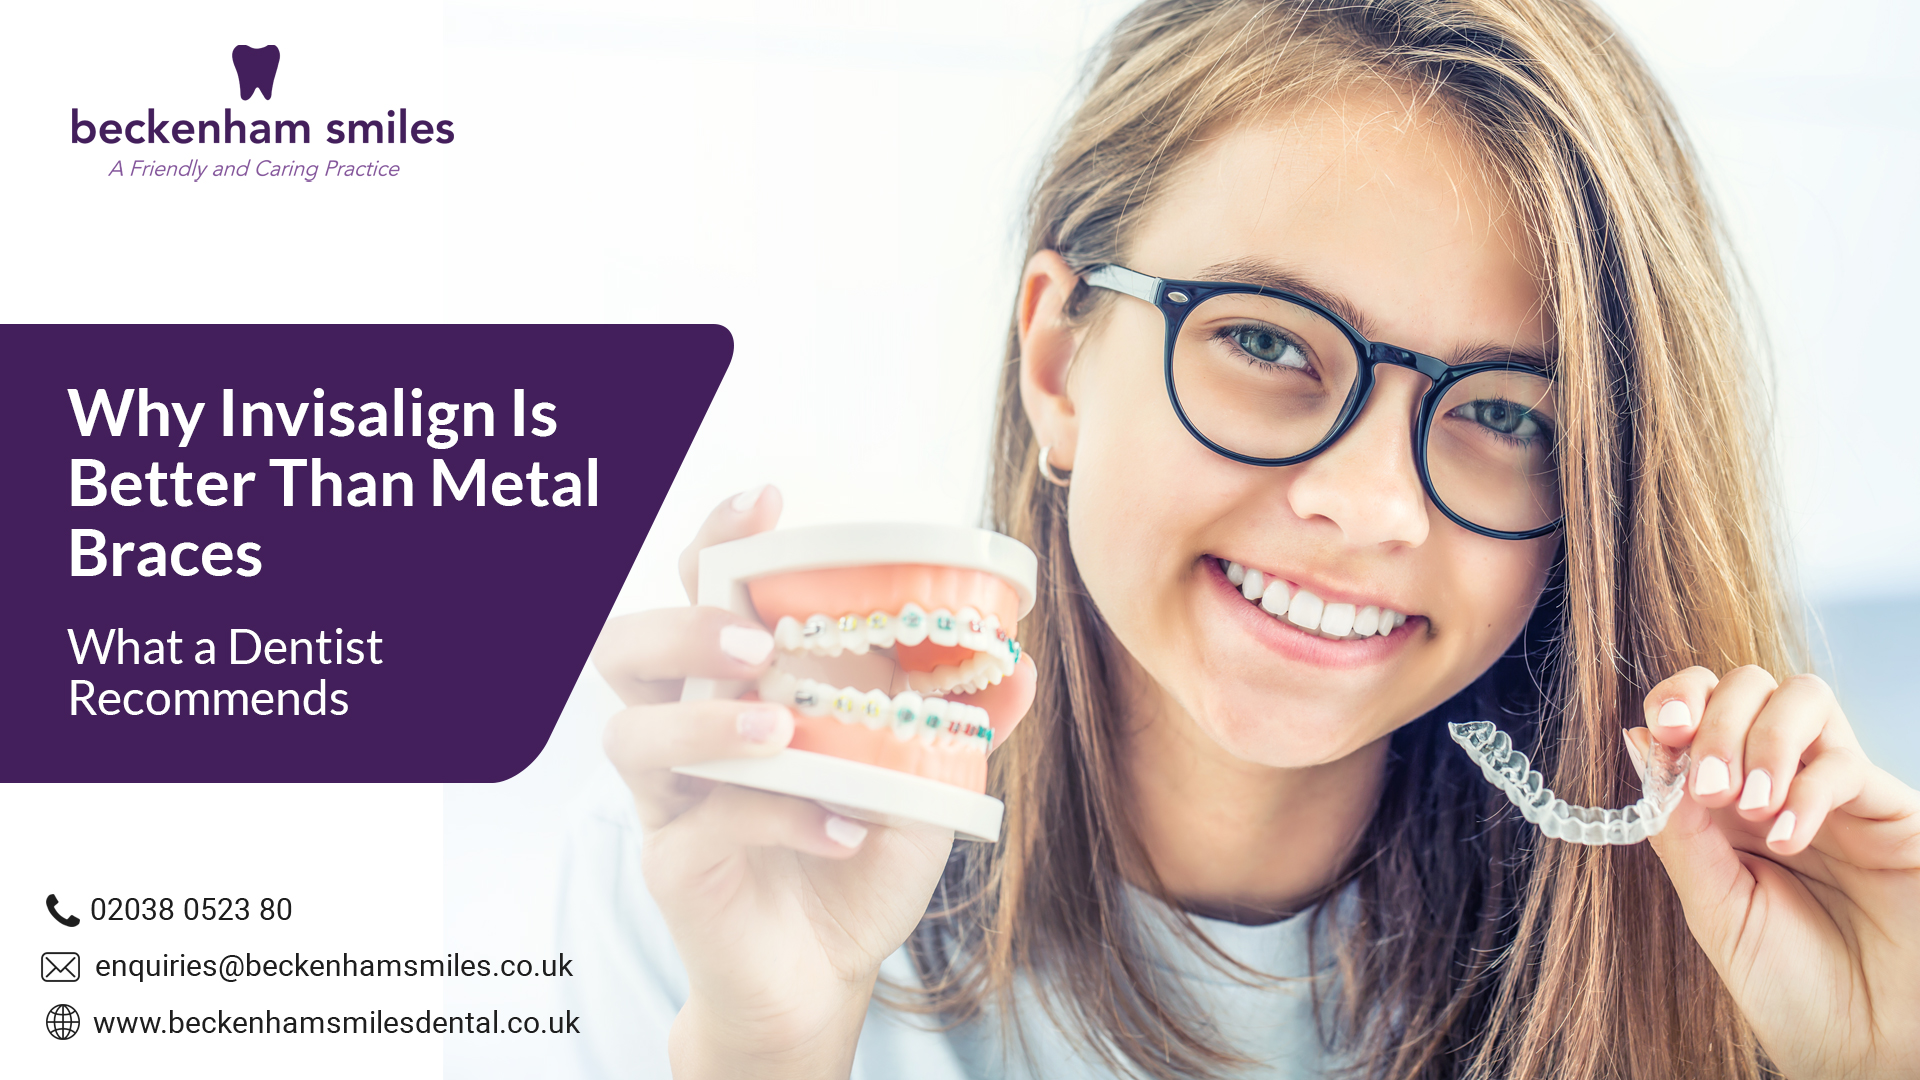 Why Invisalign Is Better Than Metal Braces- What a Dentist Recommends